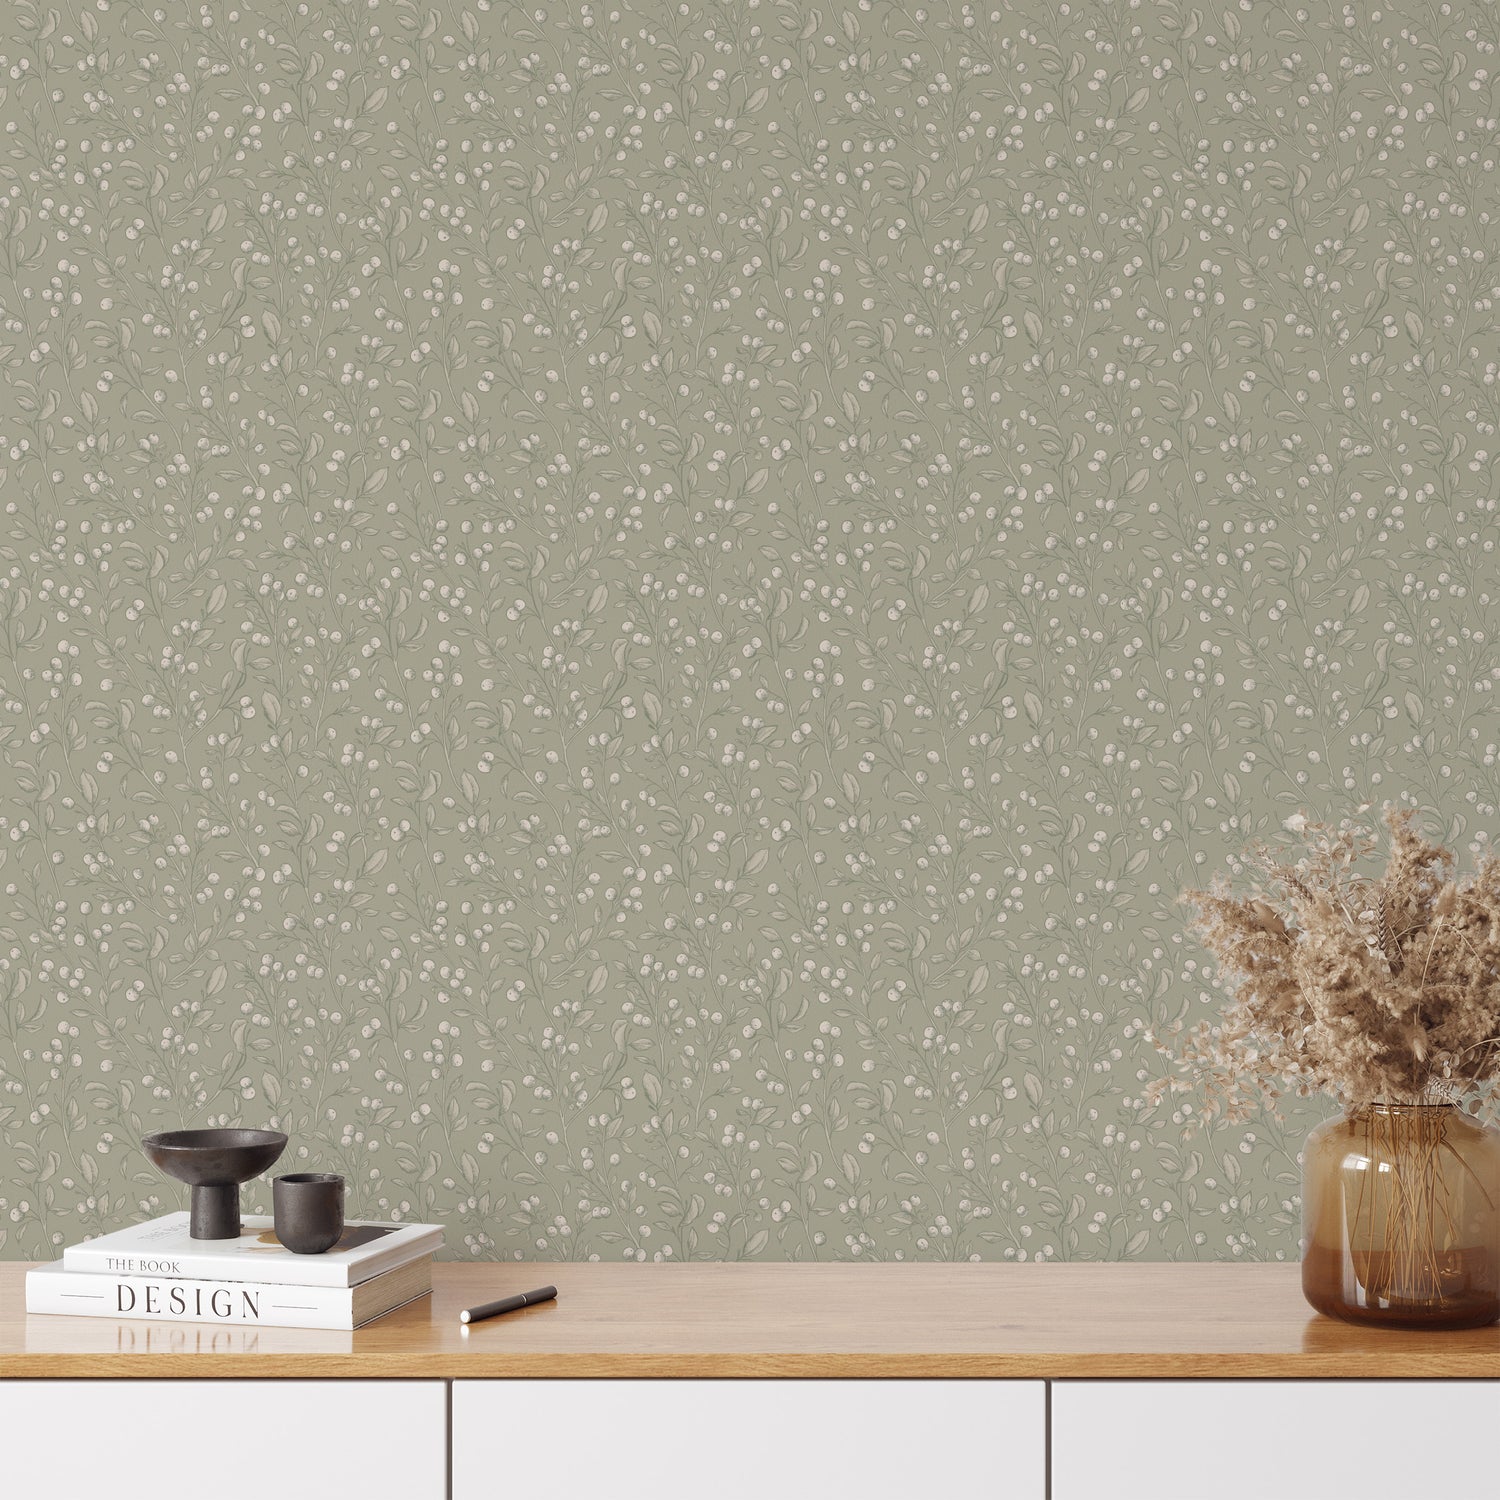 Mockup of our Berries Wallpaper in Dry Sage is a peel and stick, removable wallpaper with hand-drawn sketched berries in dry sage and white by artist Mariah Cottrell.